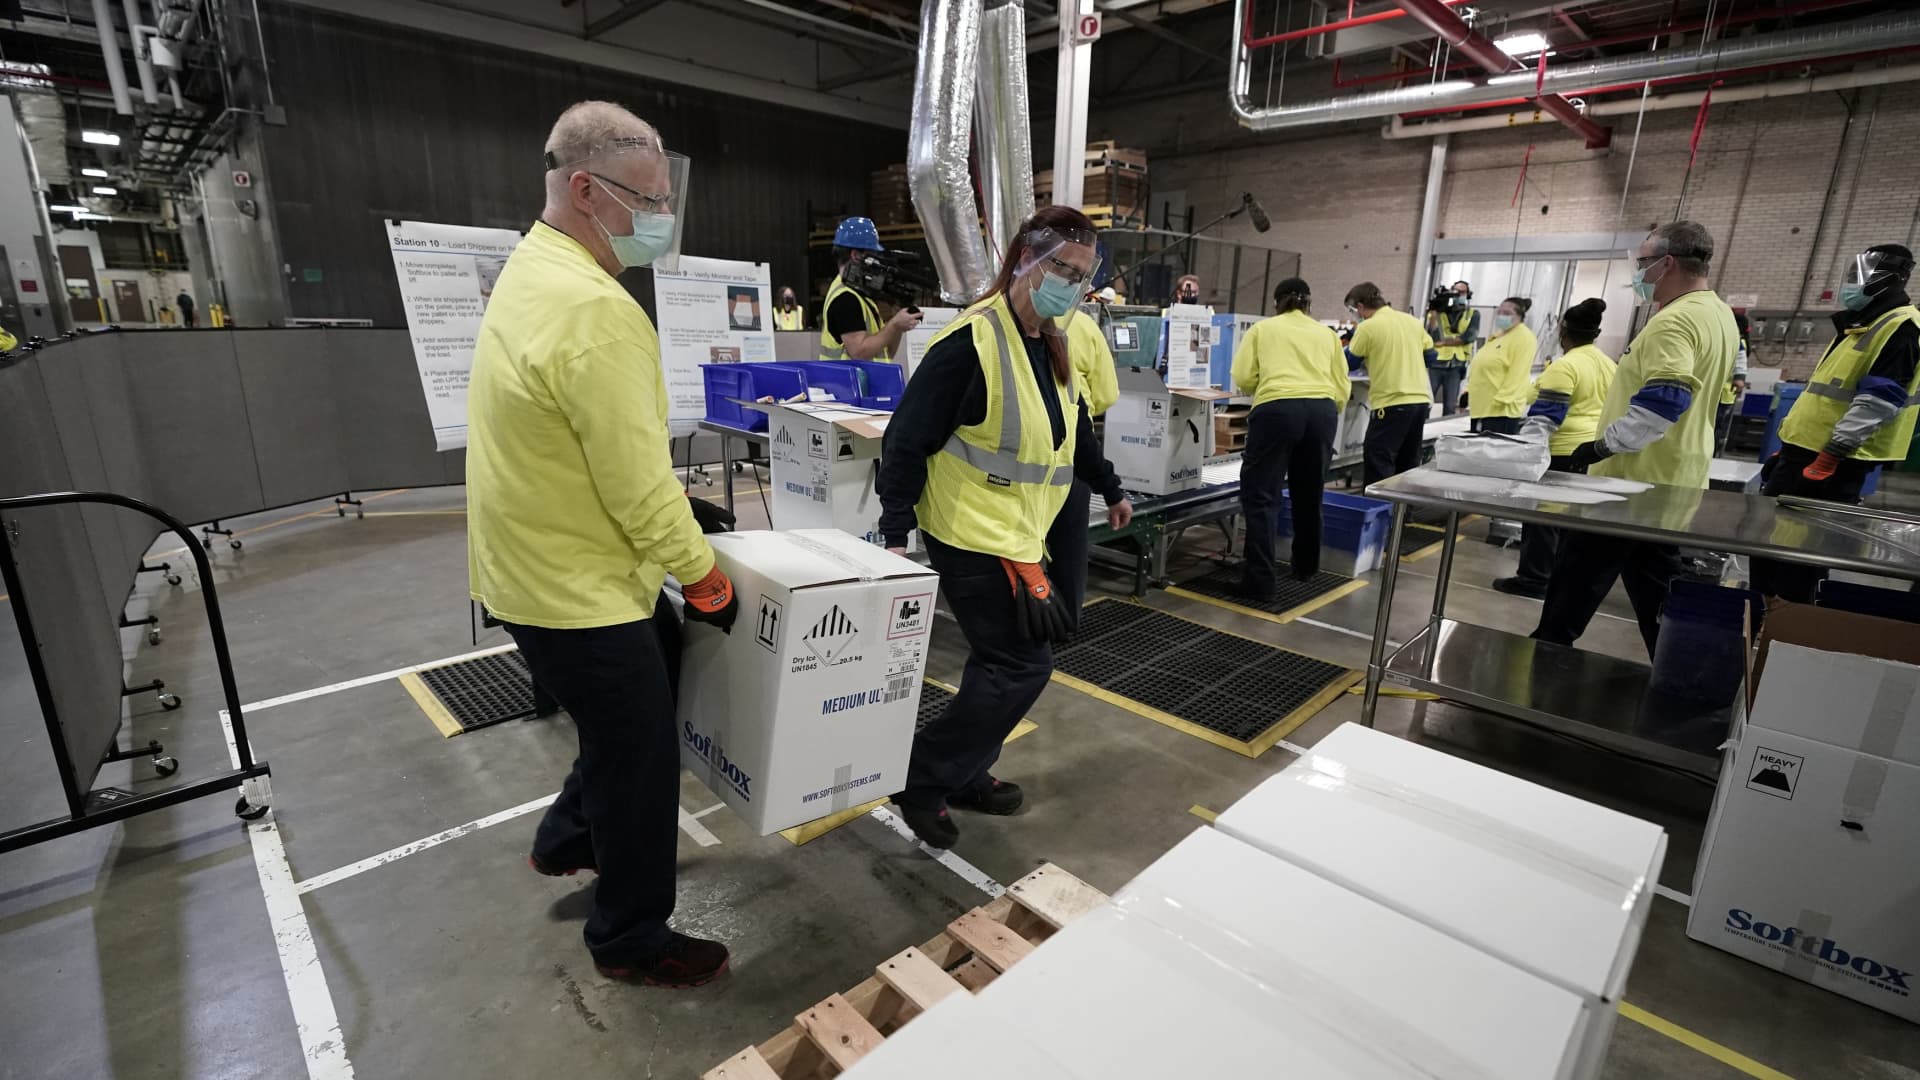 Boxes containing the Pfizer-BioNTech COVID-19 vaccine are prepared to be shipped at the Pfizer Global Supply Kalamazoo manufacturing plant in Portage, Michigan, U.S., December 13, 2020.